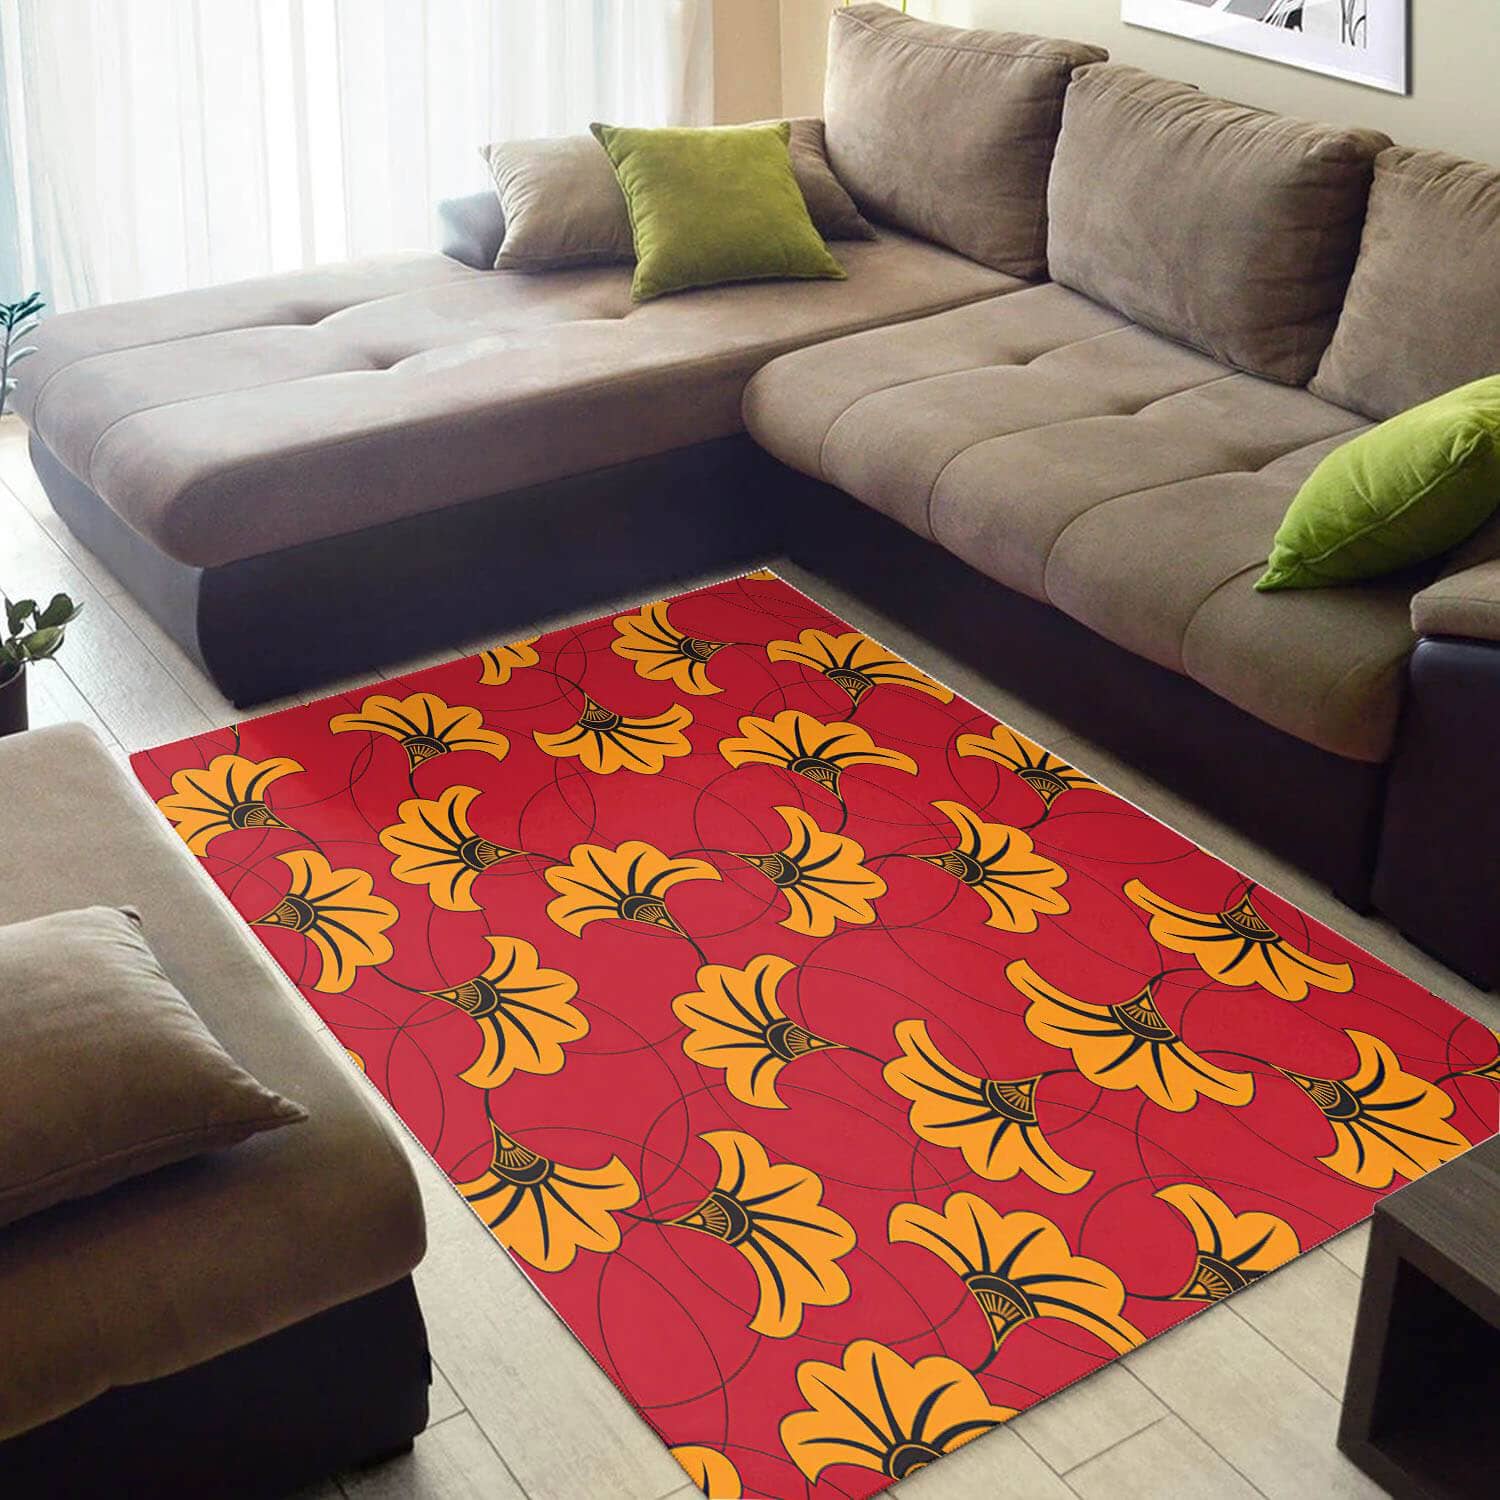 Nice African Vintage Afrocentric Ethnic Seamless Pattern Themed Living Room Rug